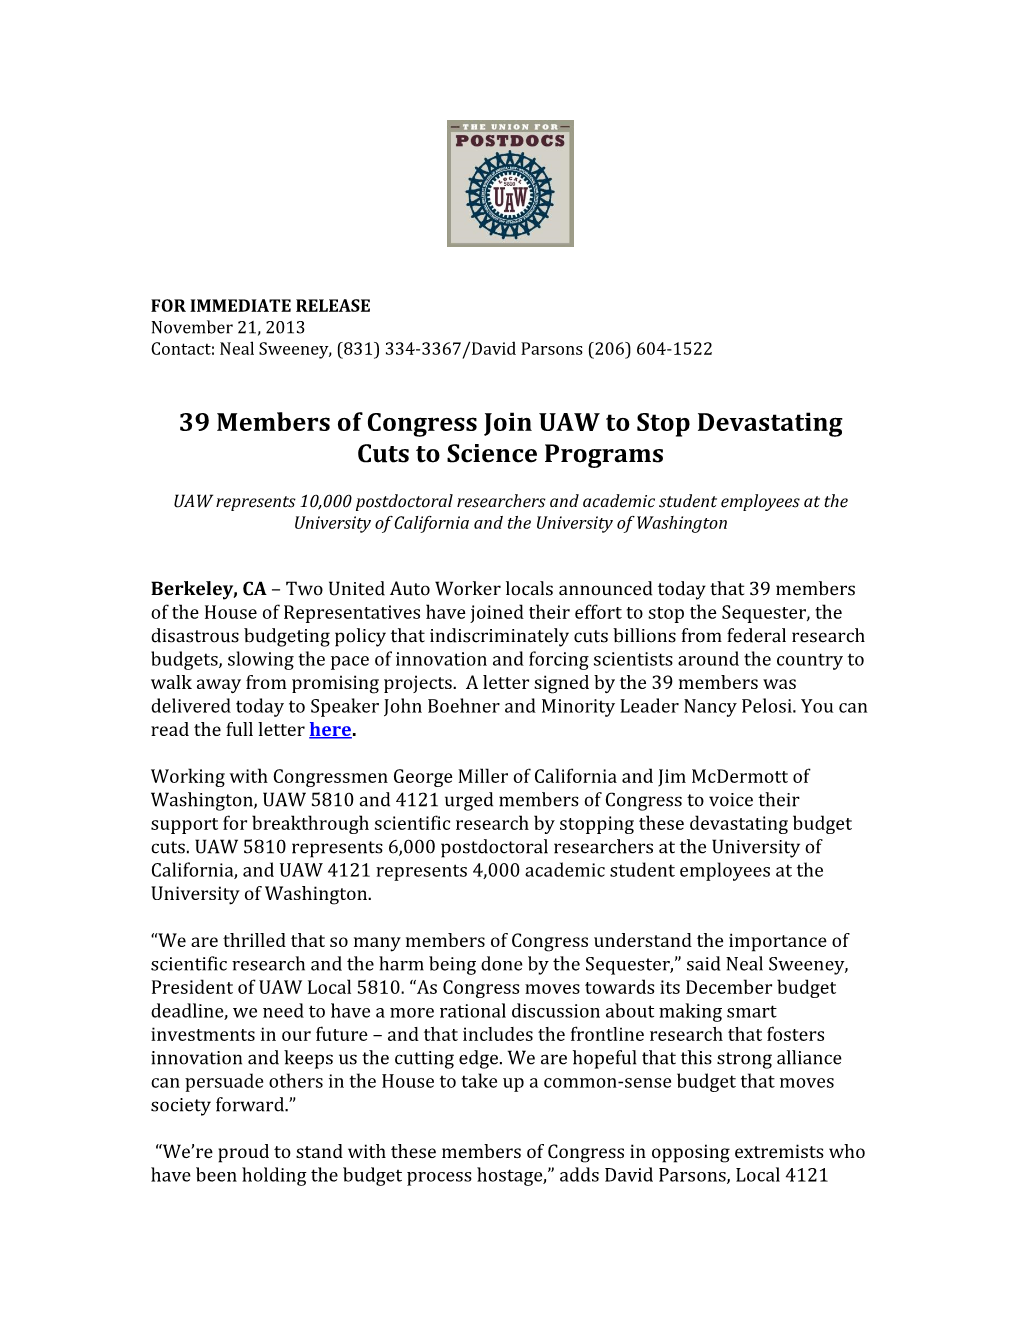 39 Members of Congress Join UAW to Stop Devastating Cuts to Science Programs